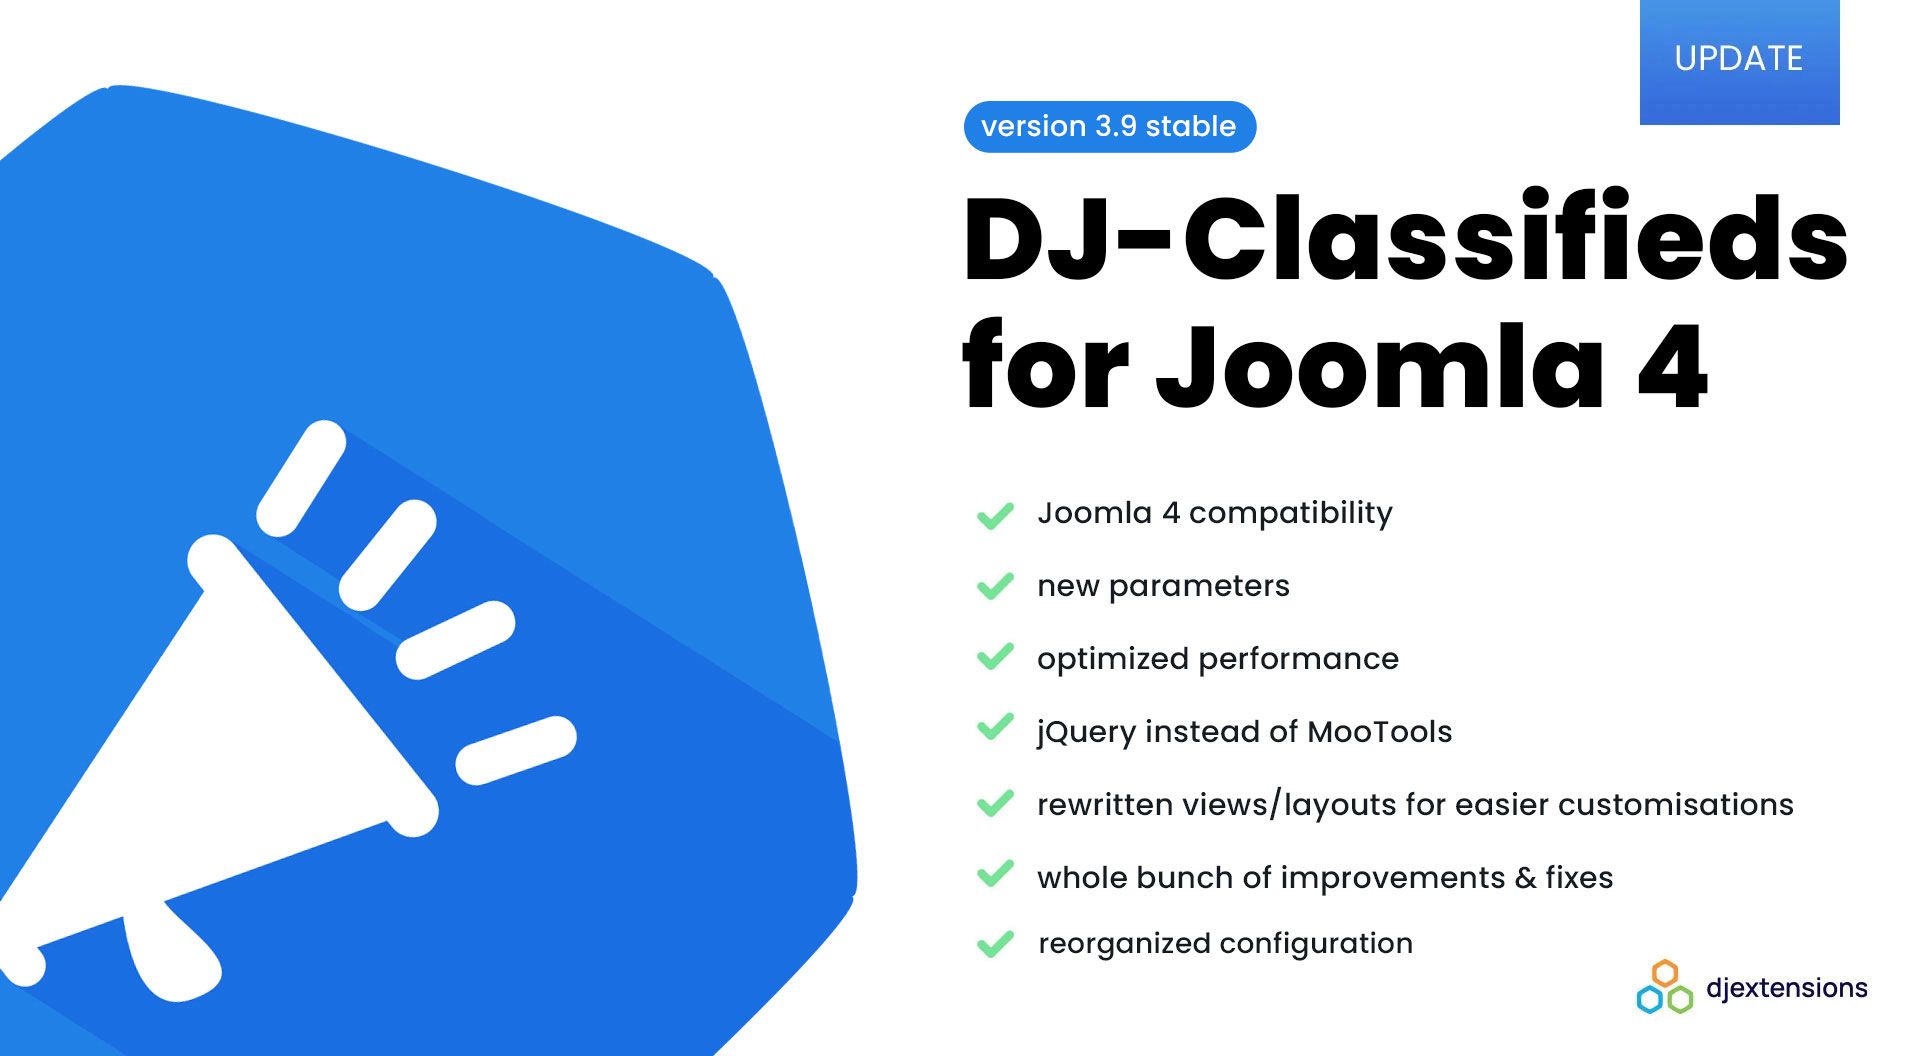 DJ-Classifieds update with the Joomla 4 compatibility!